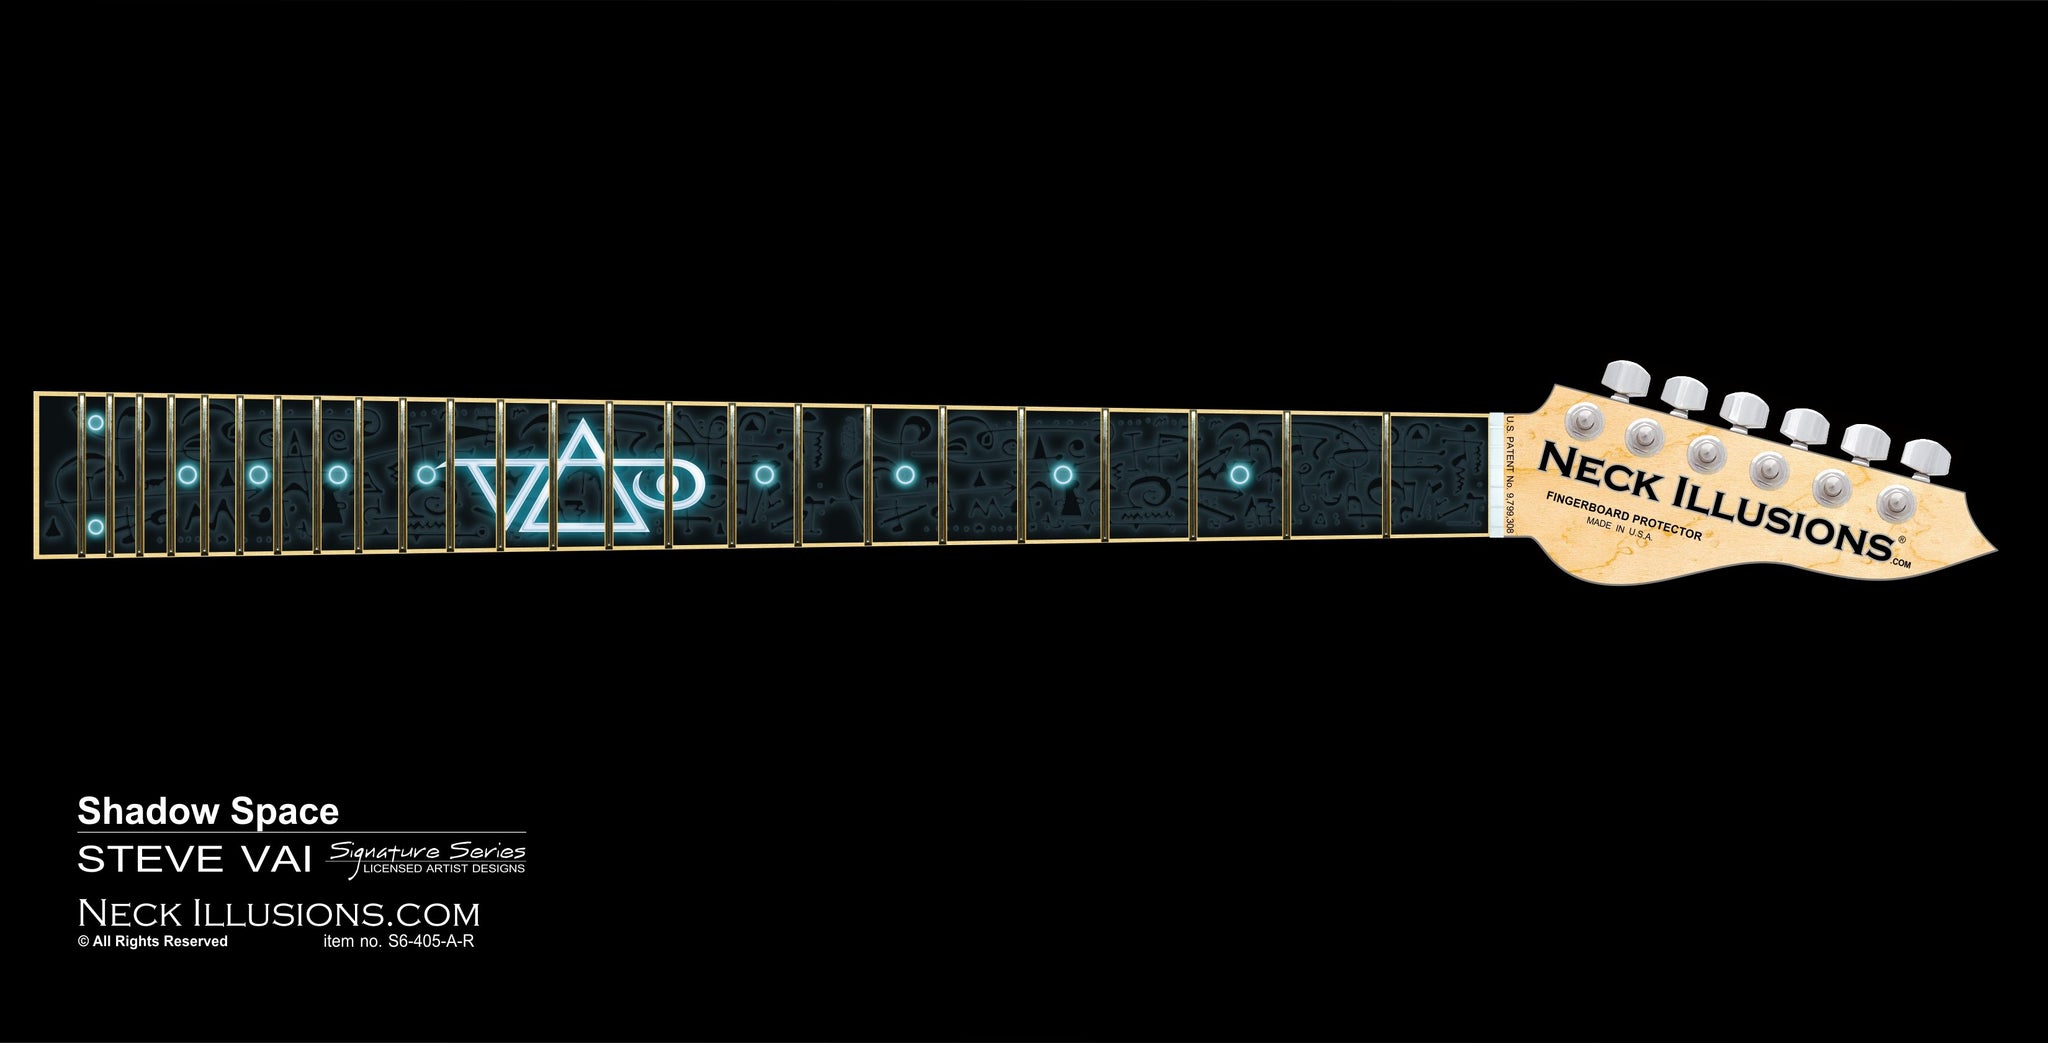 up close image of a guitar neck with a fret protector that is black with dark colored symbols throughout. descending from the center of the fret protector is a glowing light blue and white steve vai logo. The steve vai logo makes the word "vai" with an upside down triangle, a right side up one, and a line going across the triangles with a curl at the end next to the triangle that is upright.